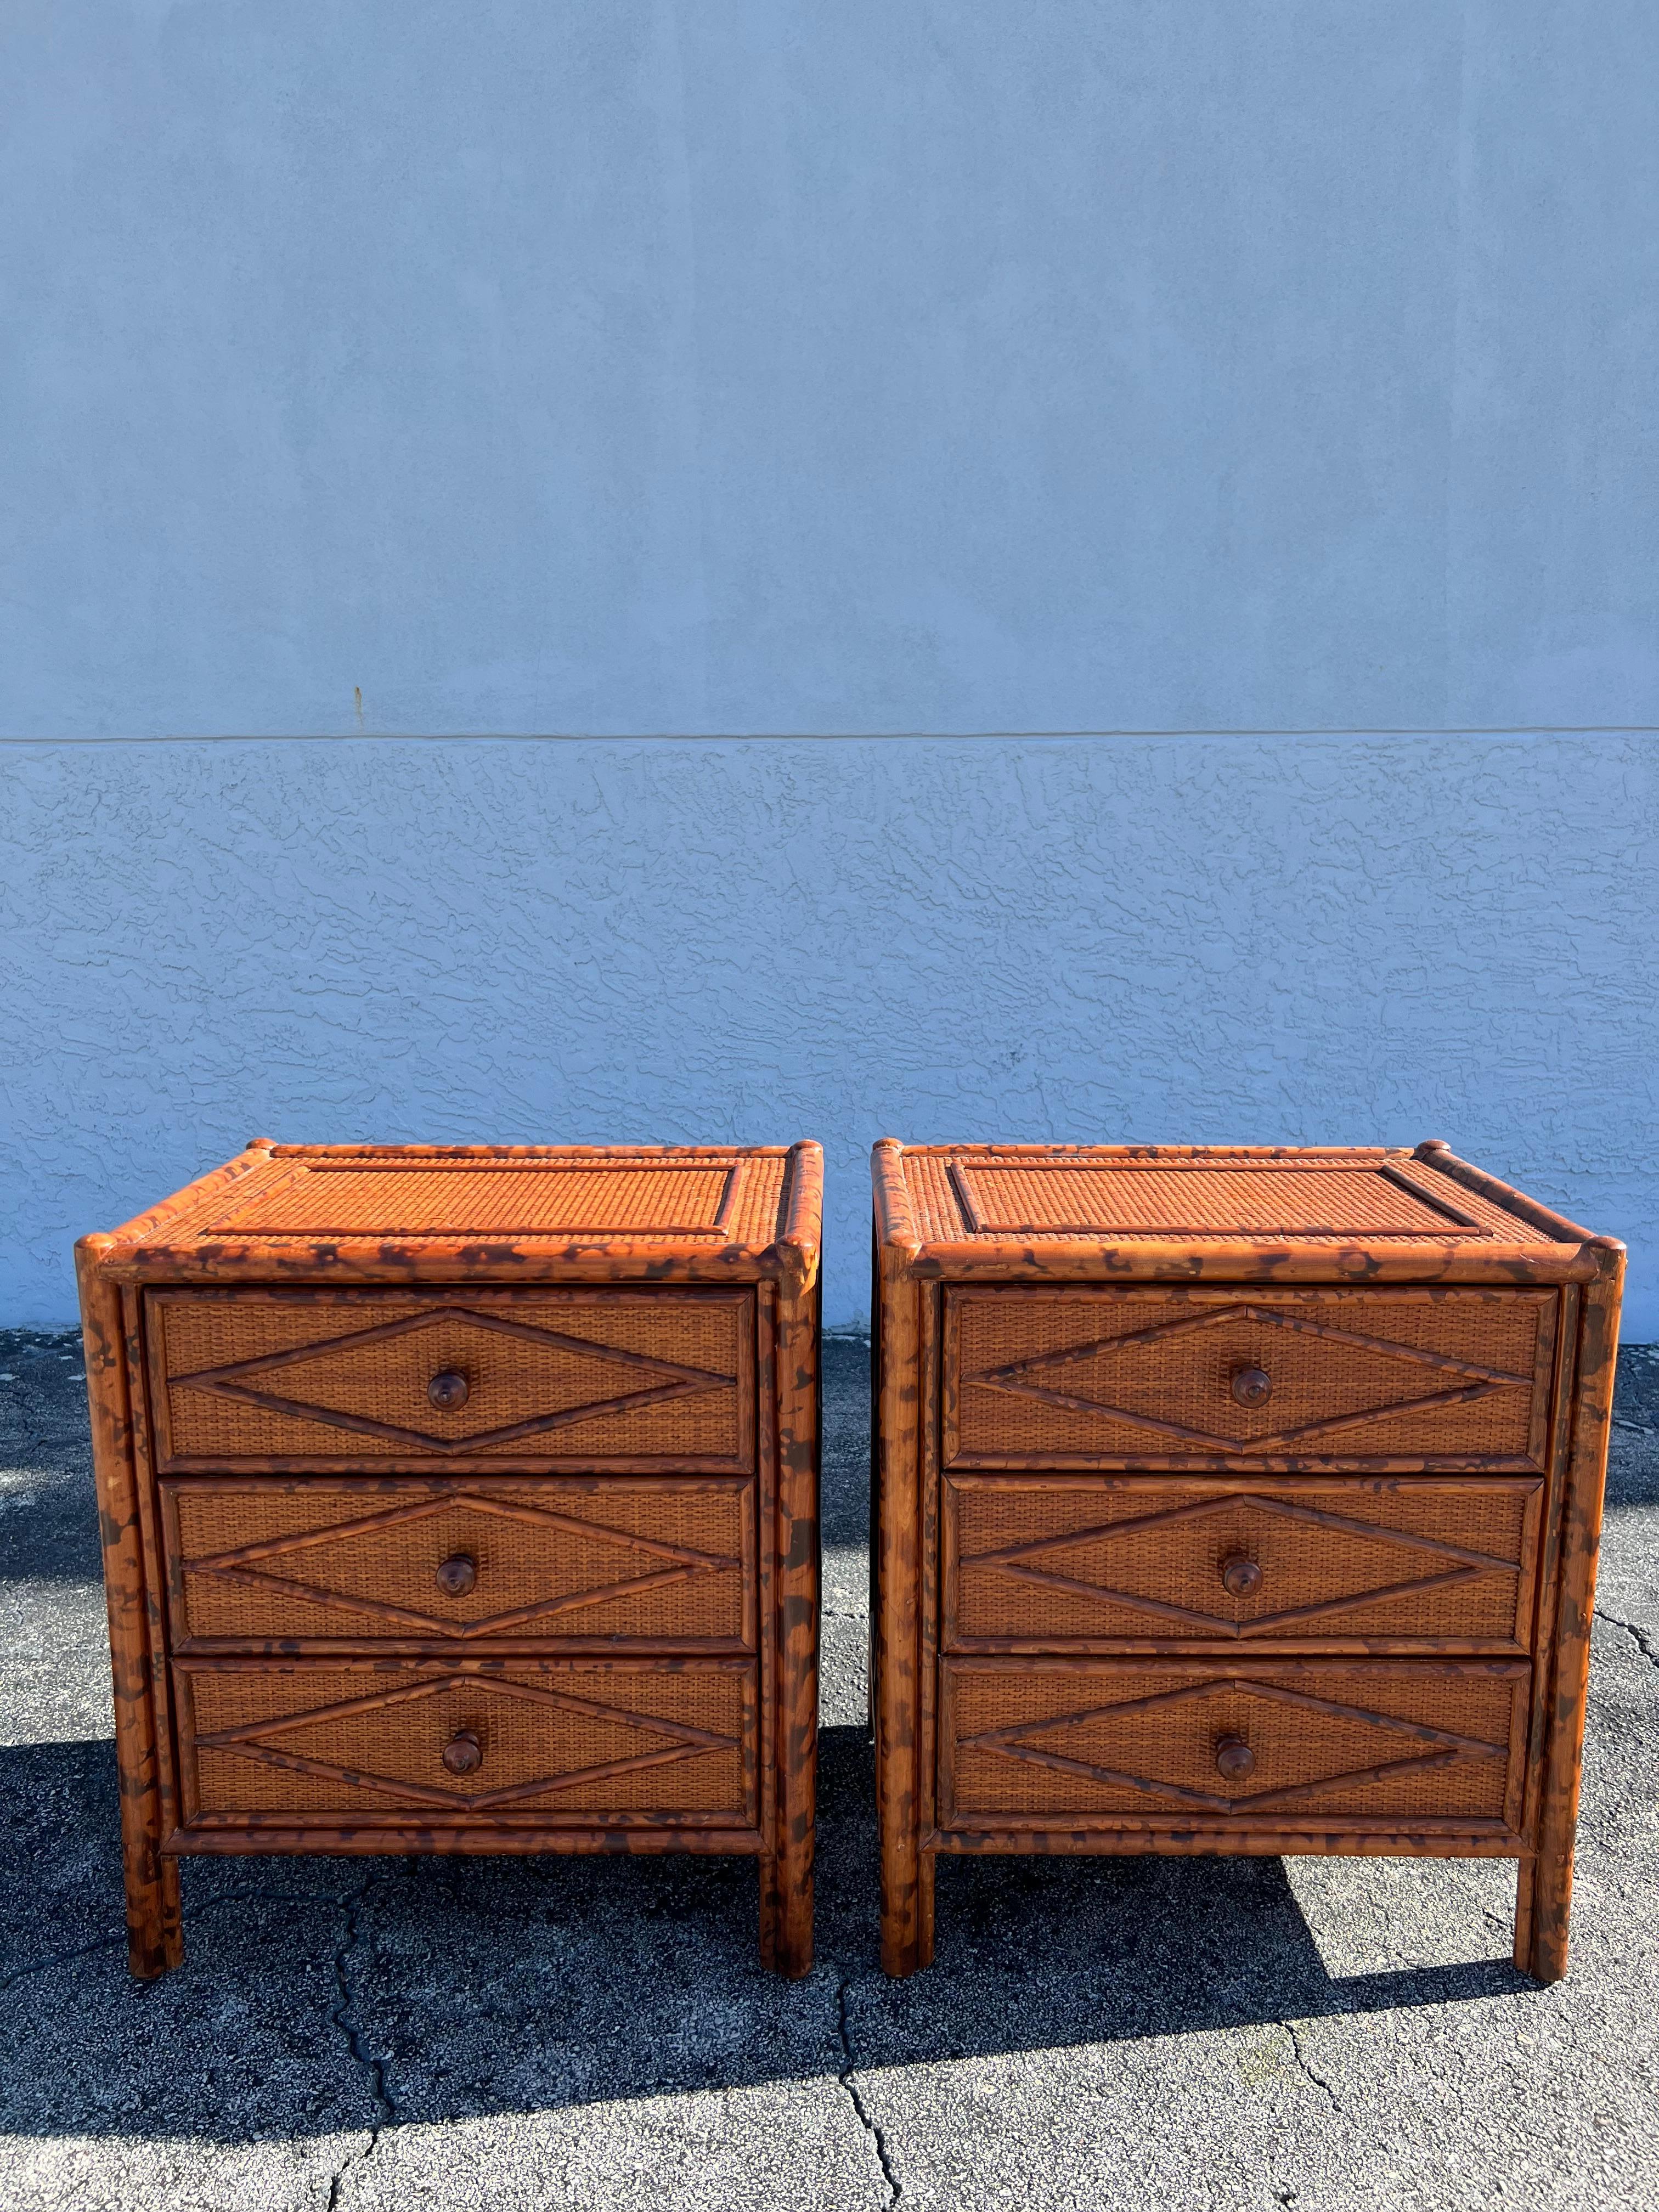 British colonial style burnt bamboo and cane pair of nightstands. Signed Bloomingdales. Slight wear to finish of cane (please refer to photos). Additional photos available upon request.

Would work well in a variety of interiors such as modern, mid